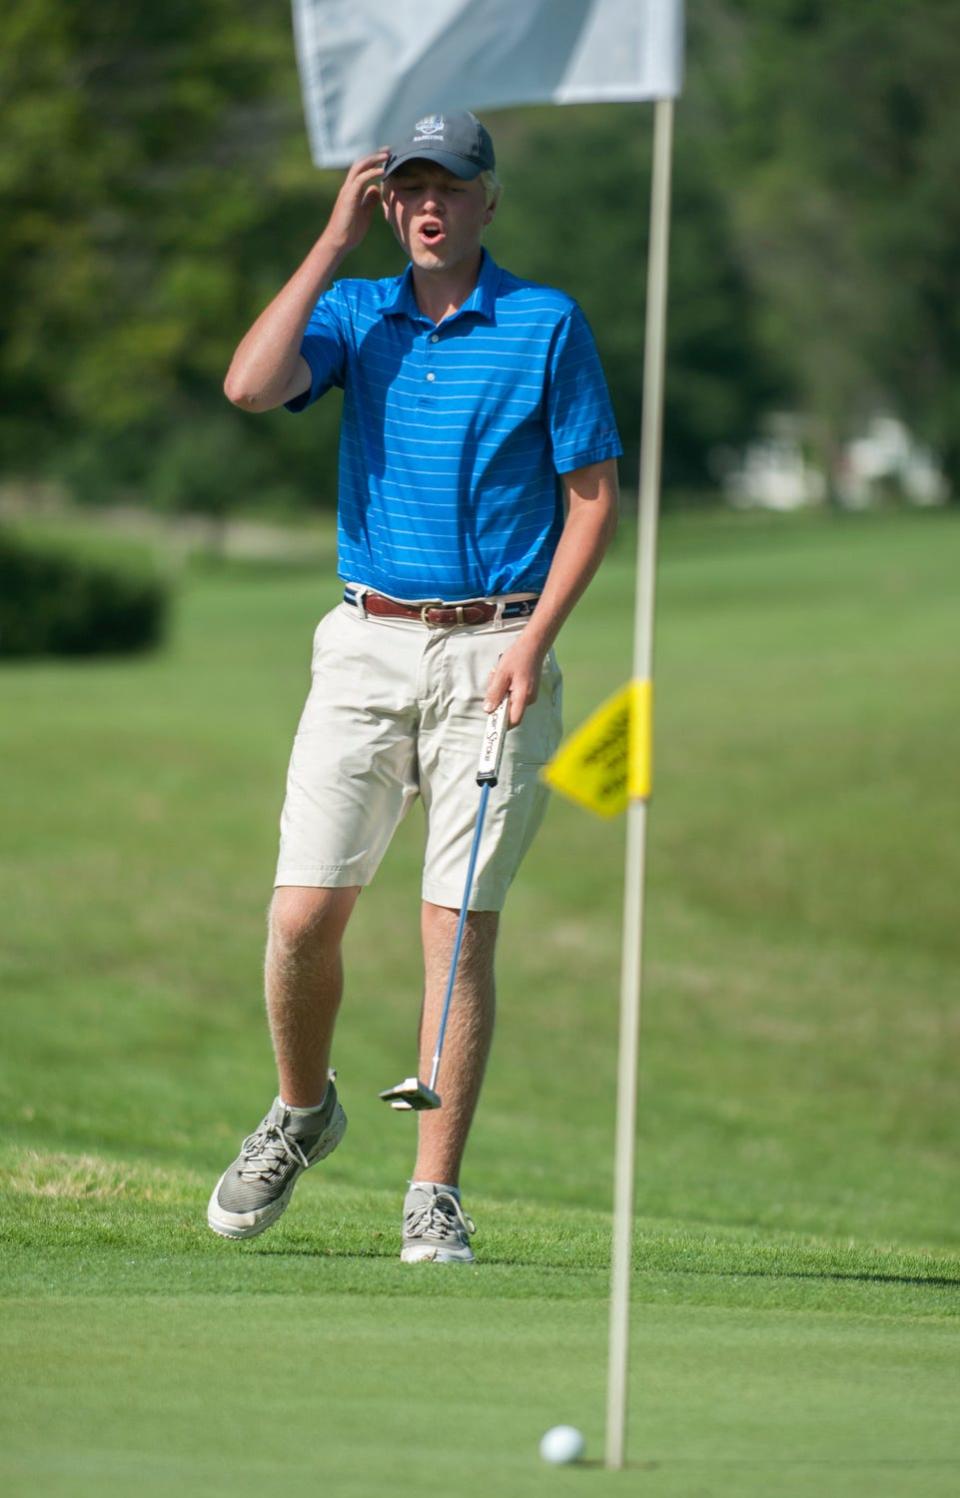 Drew Todd reacts after his putt bounces off the pin on the ninth green during the City Golf tournament at Cascades Golf Course in Bloomington, Ind. Sunday, July 16, 2017.